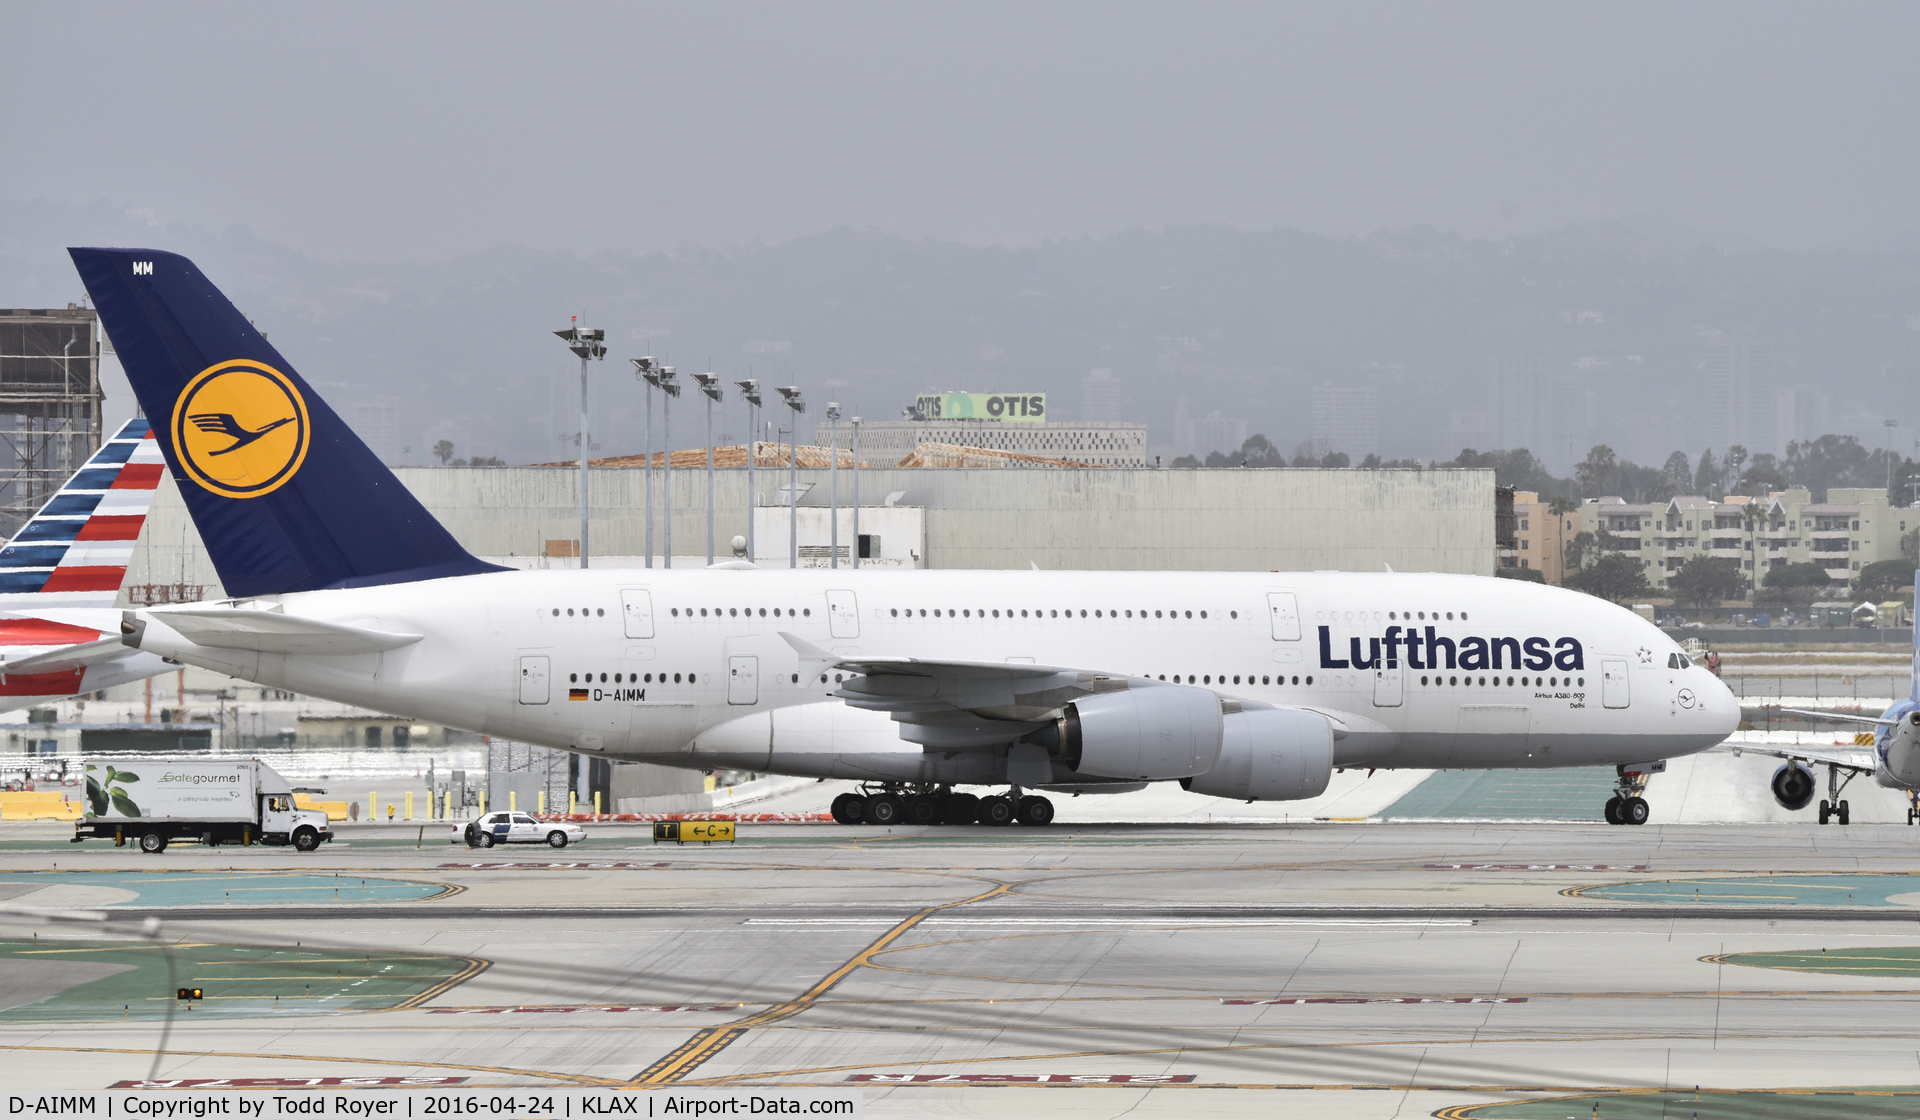 D-AIMM, 2014 Airbus A380-841 C/N 175, Taxiing to gate at LAX